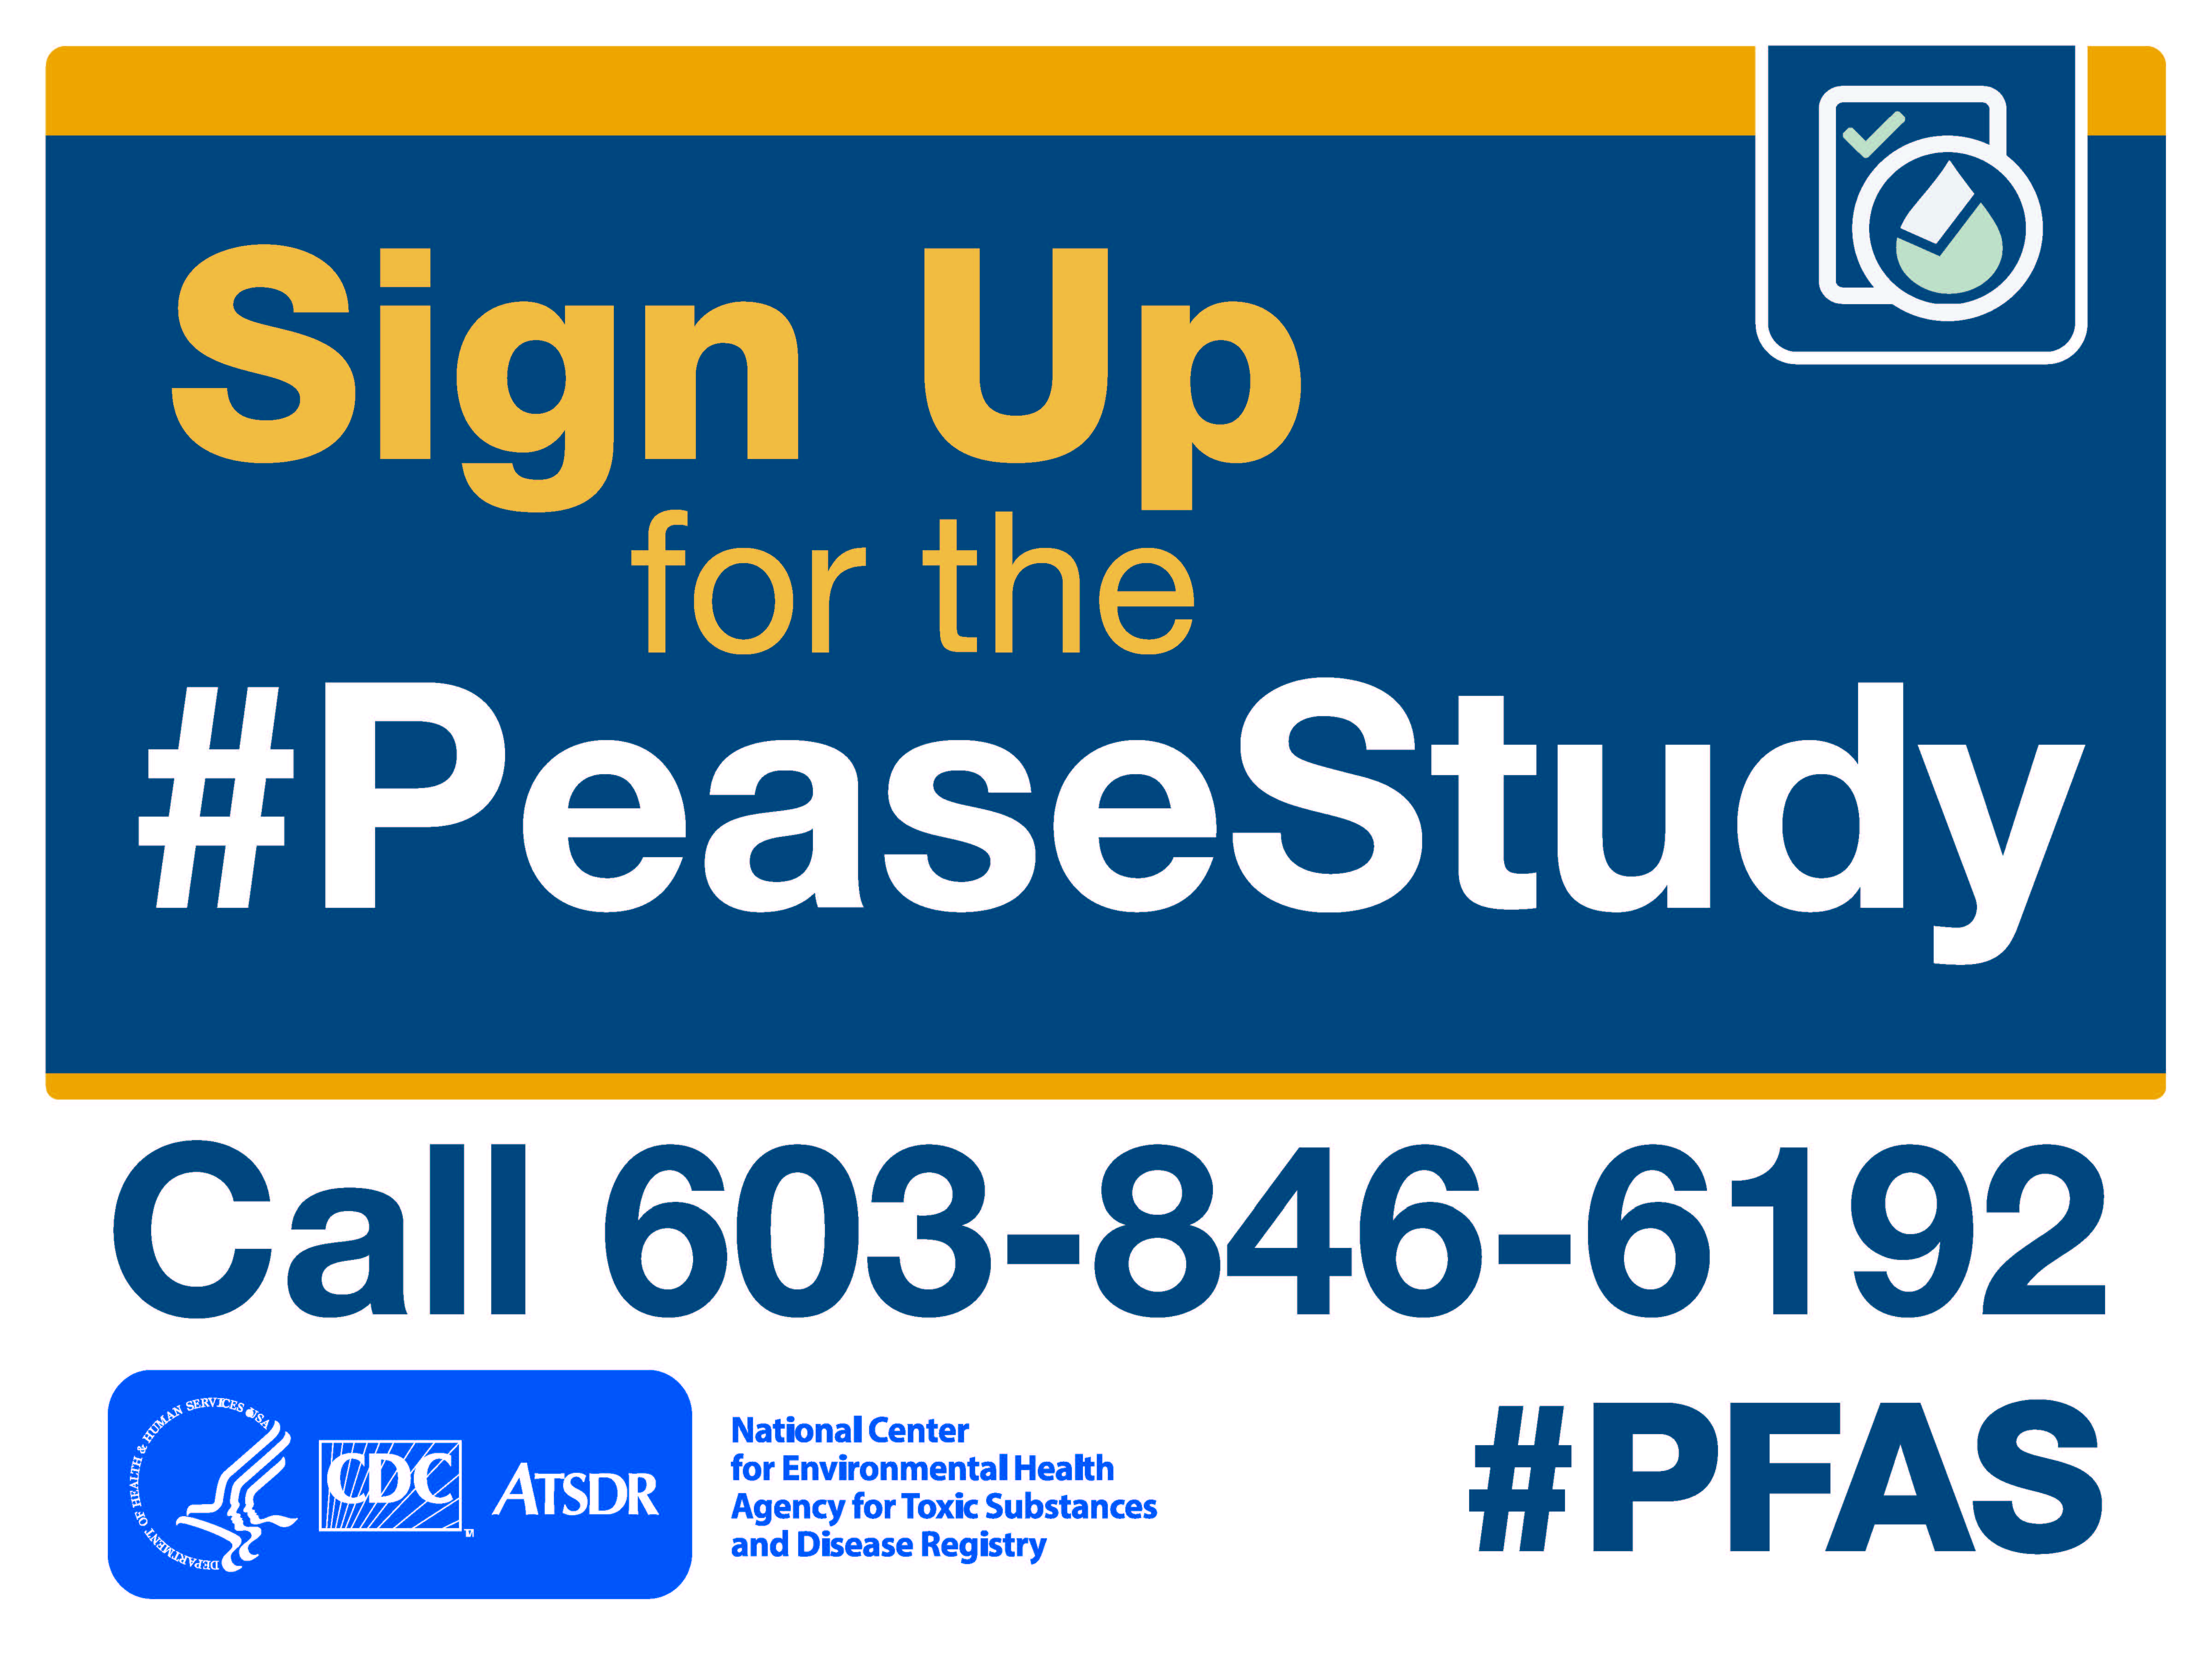 Pease Study yard sign front